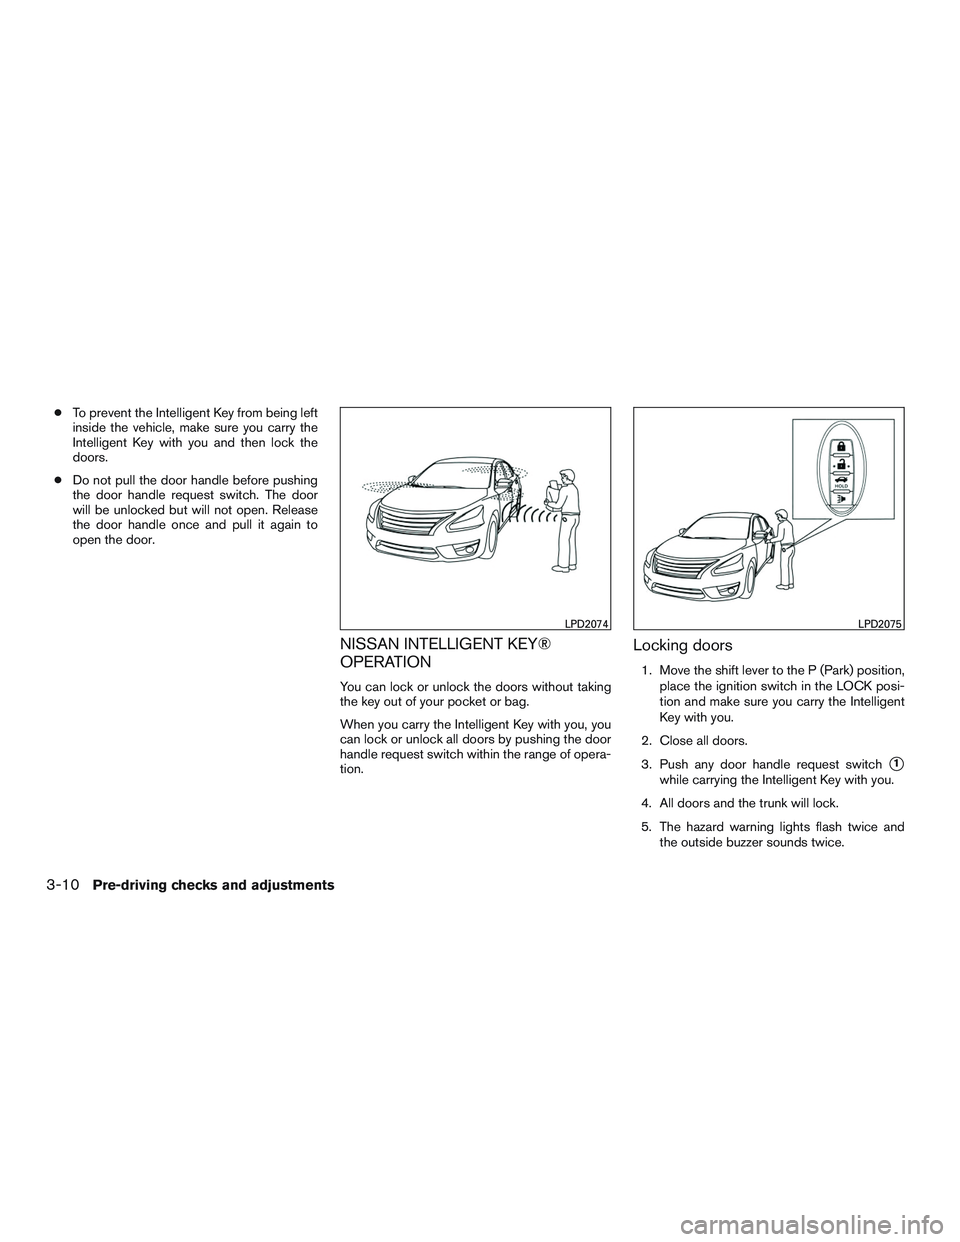 NISSAN ALTIMA SEDAN 2015  Owners Manual ●To prevent the Intelligent Key from being left
inside the vehicle, make sure you carry the
Intelligent Key with you and then lock the
doors.
● Do not pull the door handle before pushing
the door 